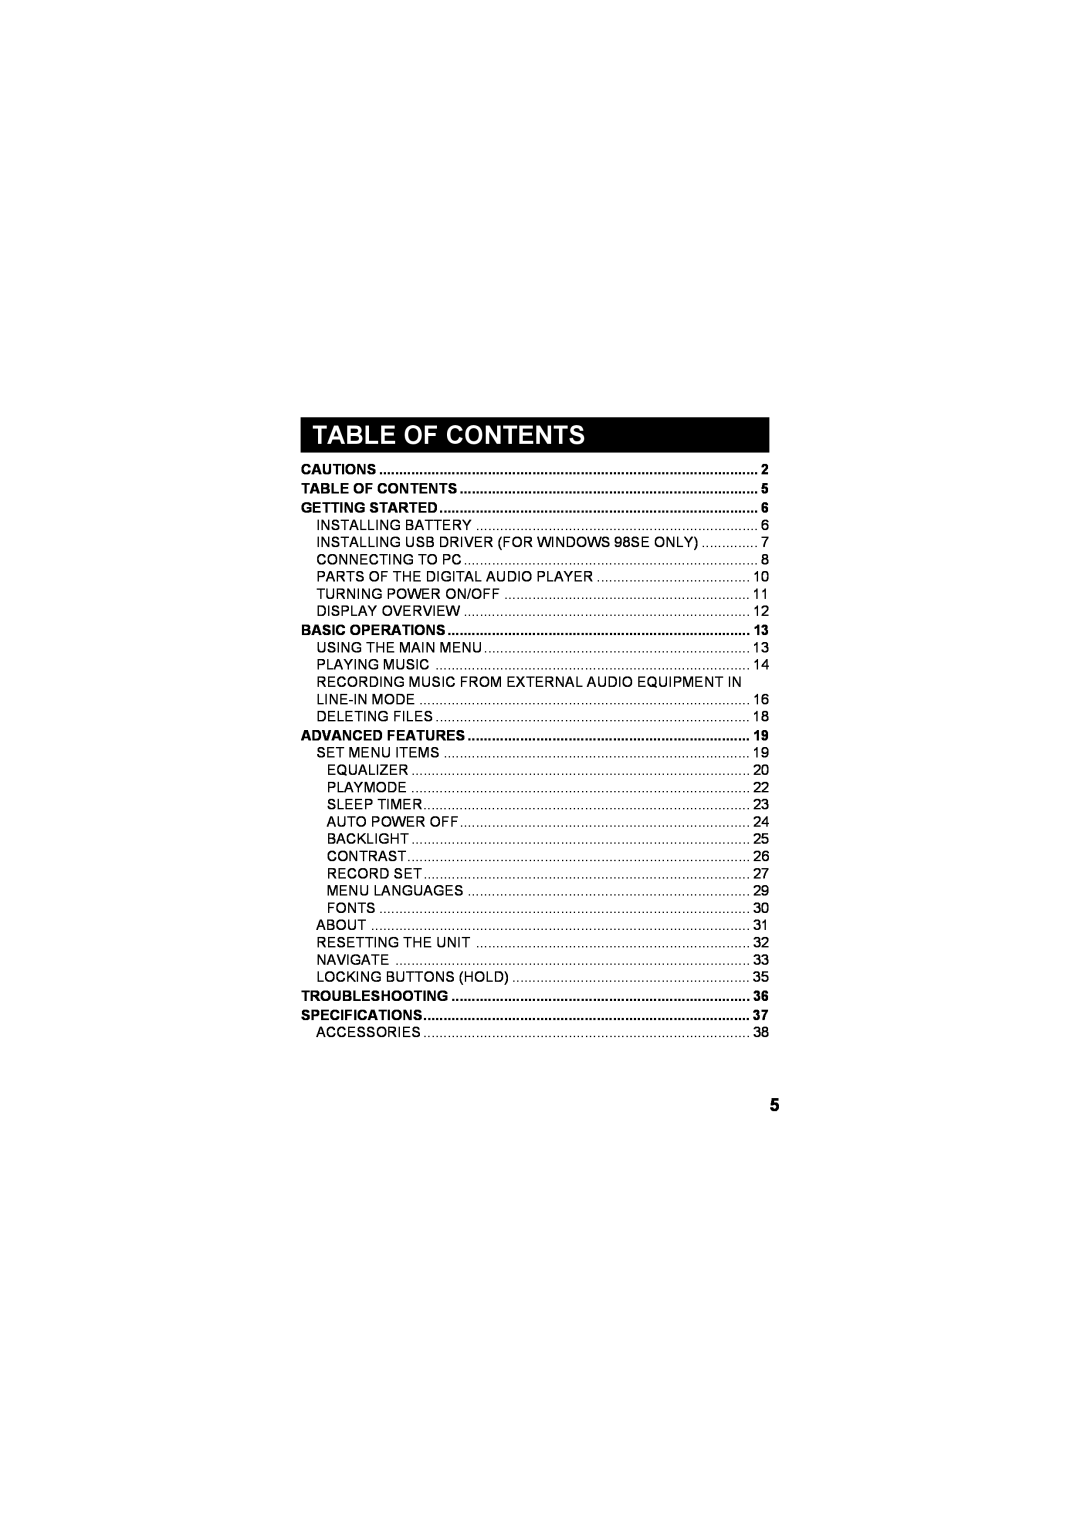 JVC XA-MP52R, XA-MP102W, XA-MP102A, XA-MP52B manual Table Of Contents, Basic Operations, Advanced Features, Troubleshooting 